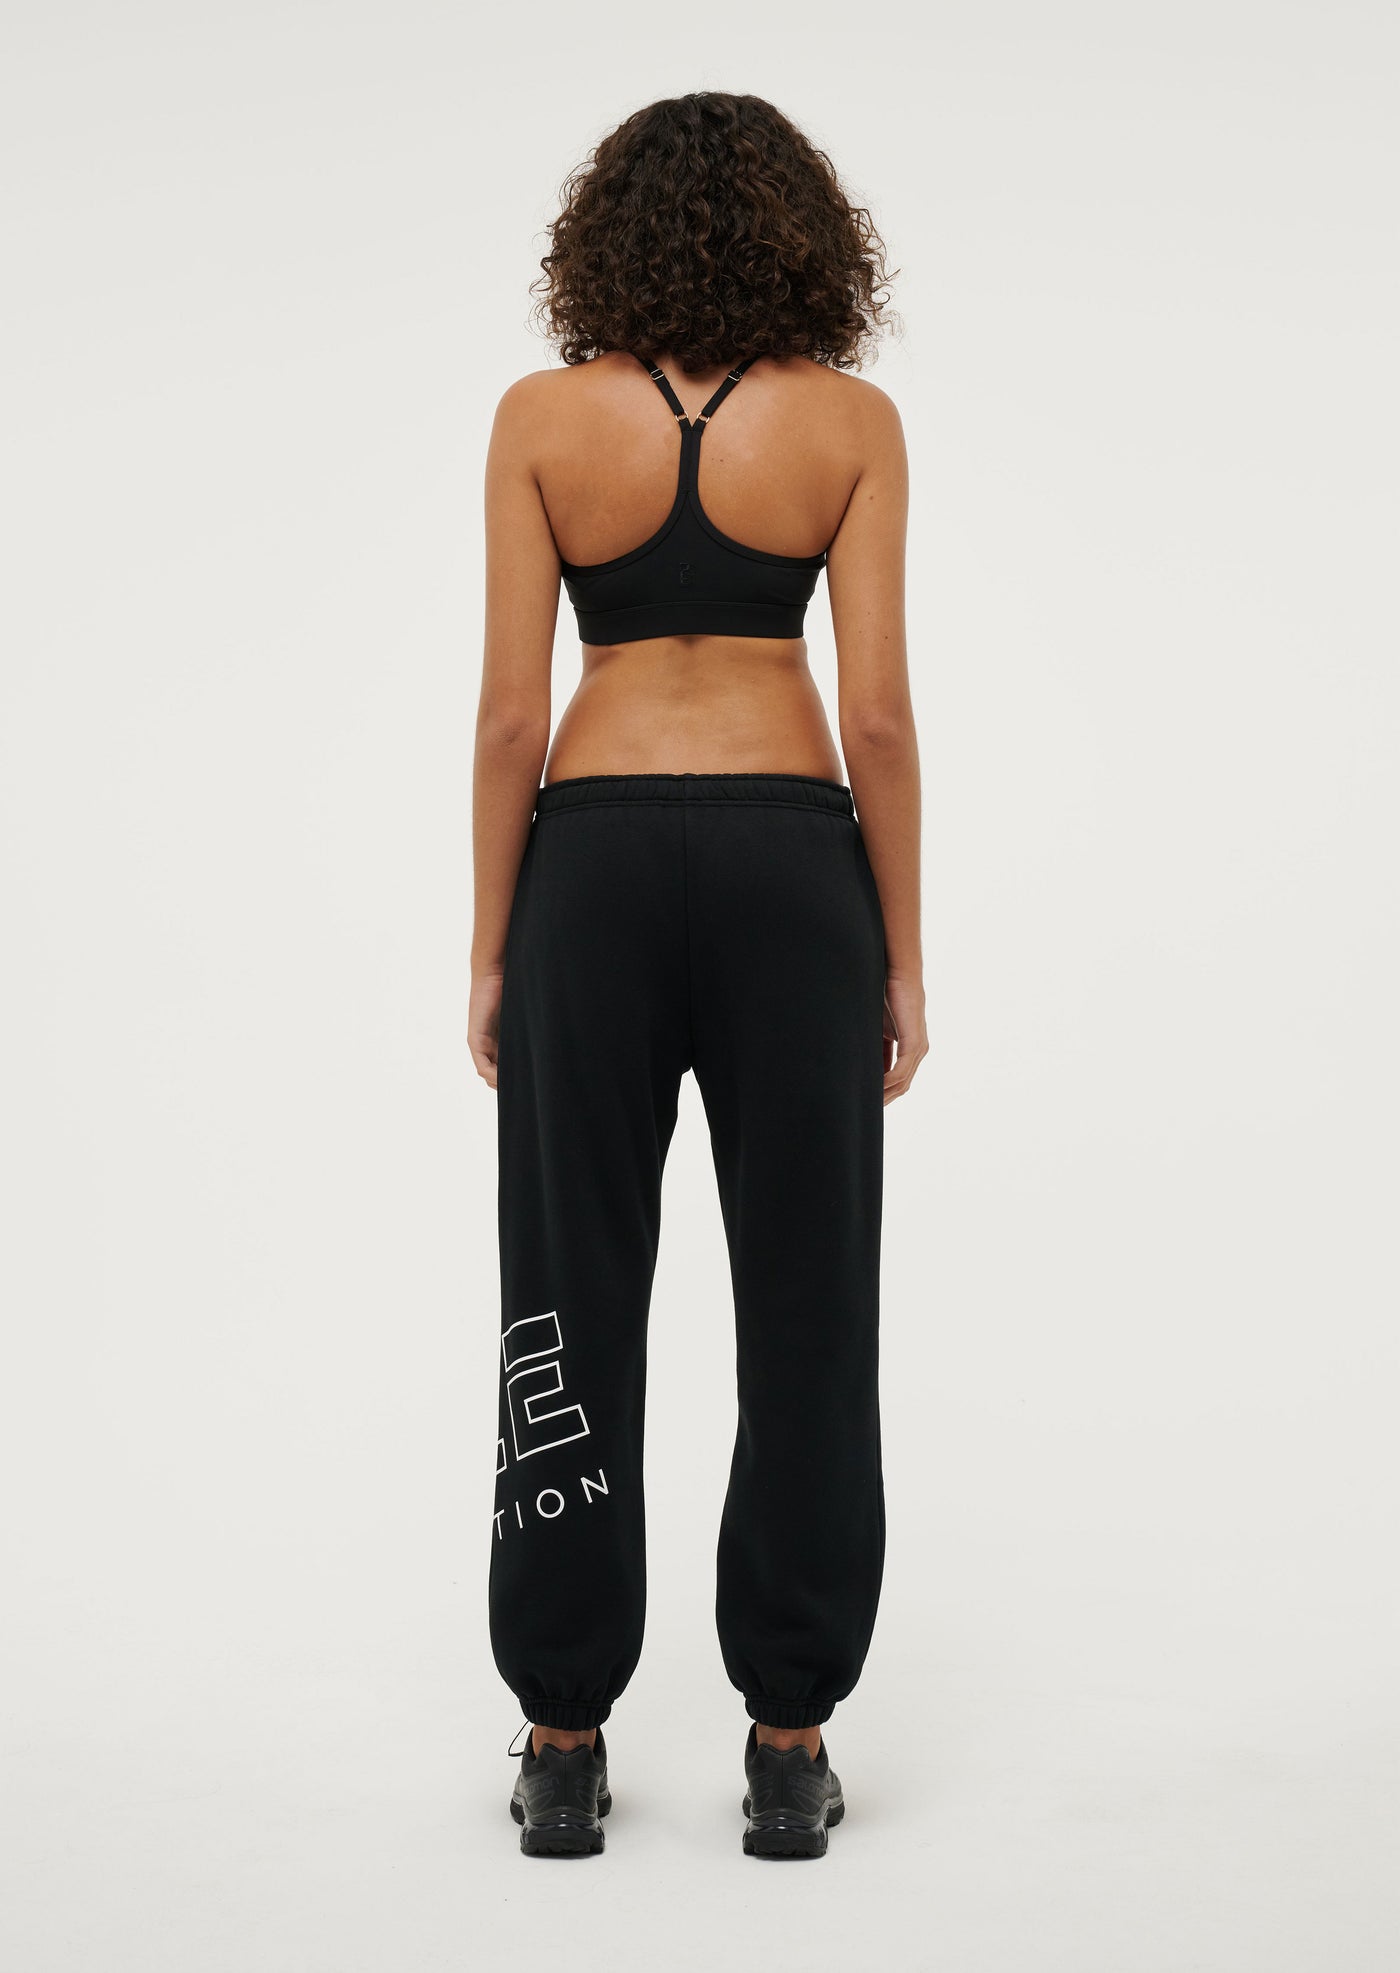 THE ORIGINAL TRACKPANT IN BLACK